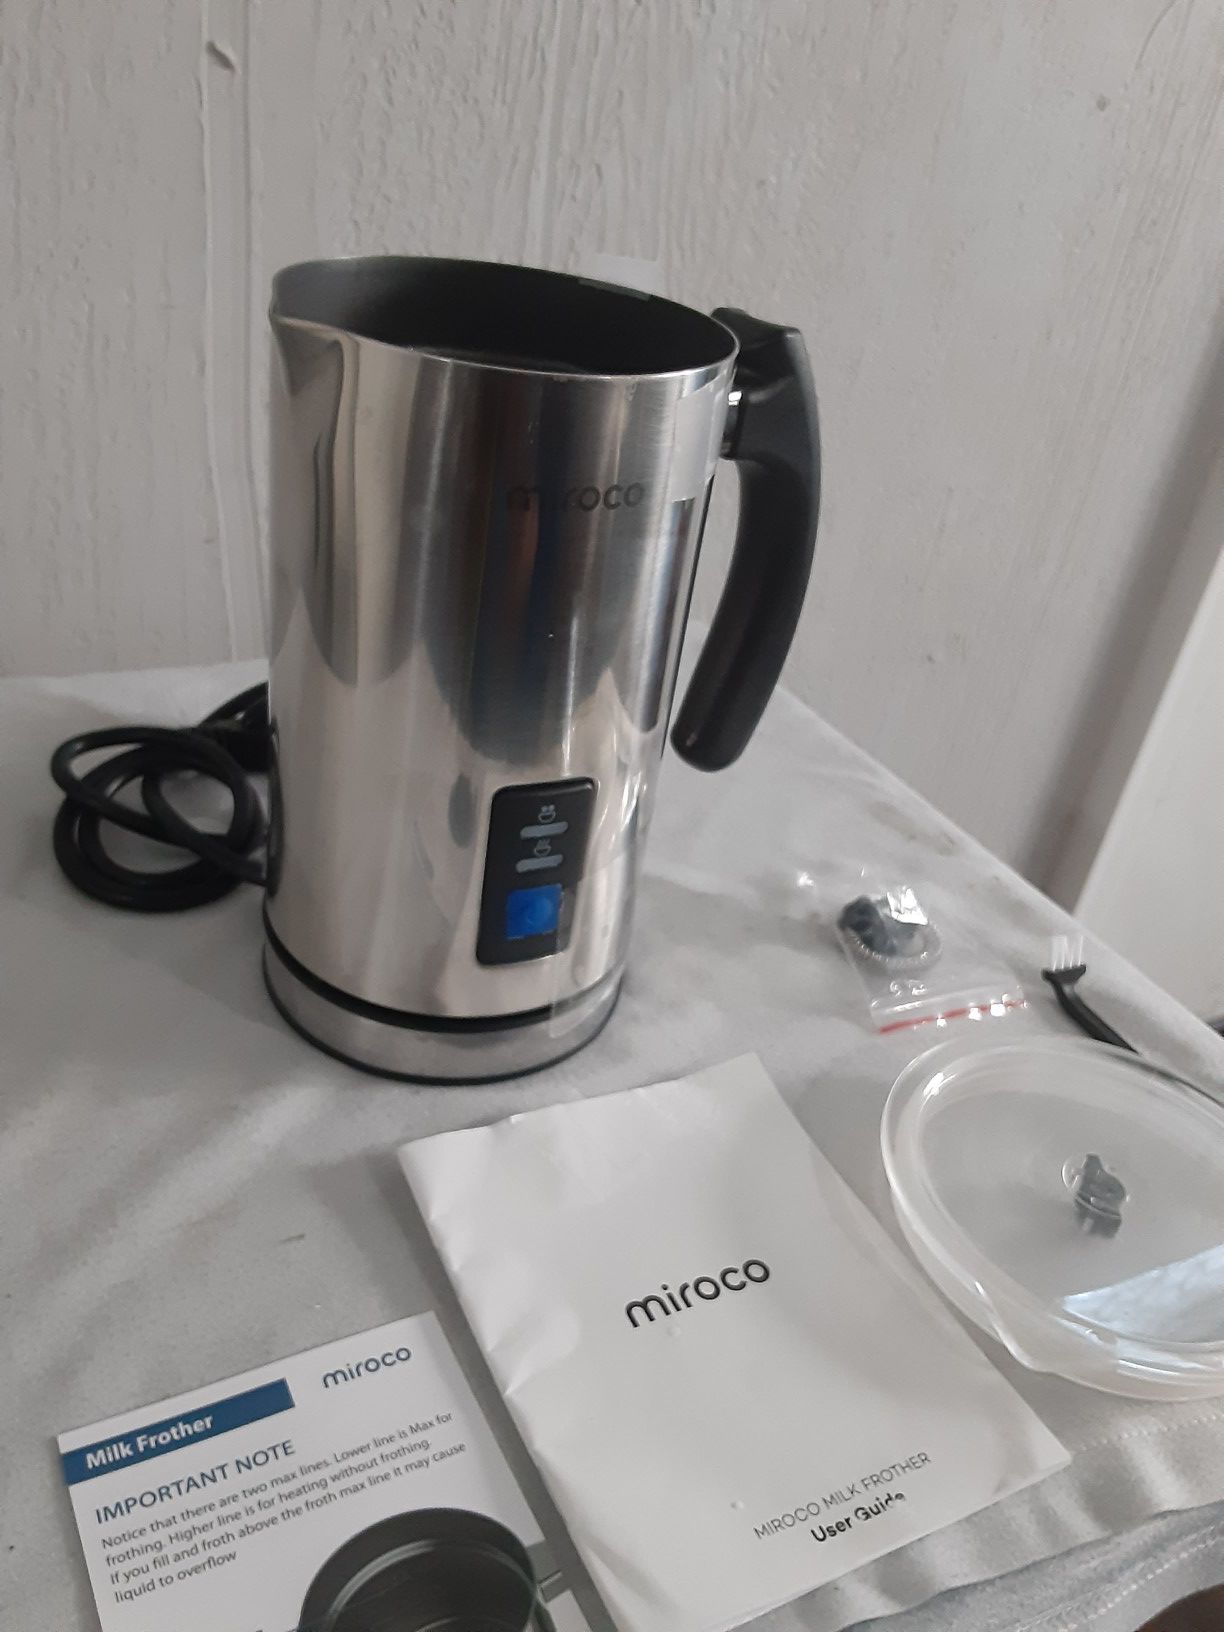 Miroco Frother Stainless Steel Automatic Hot and Cold Milk Frother Warmer